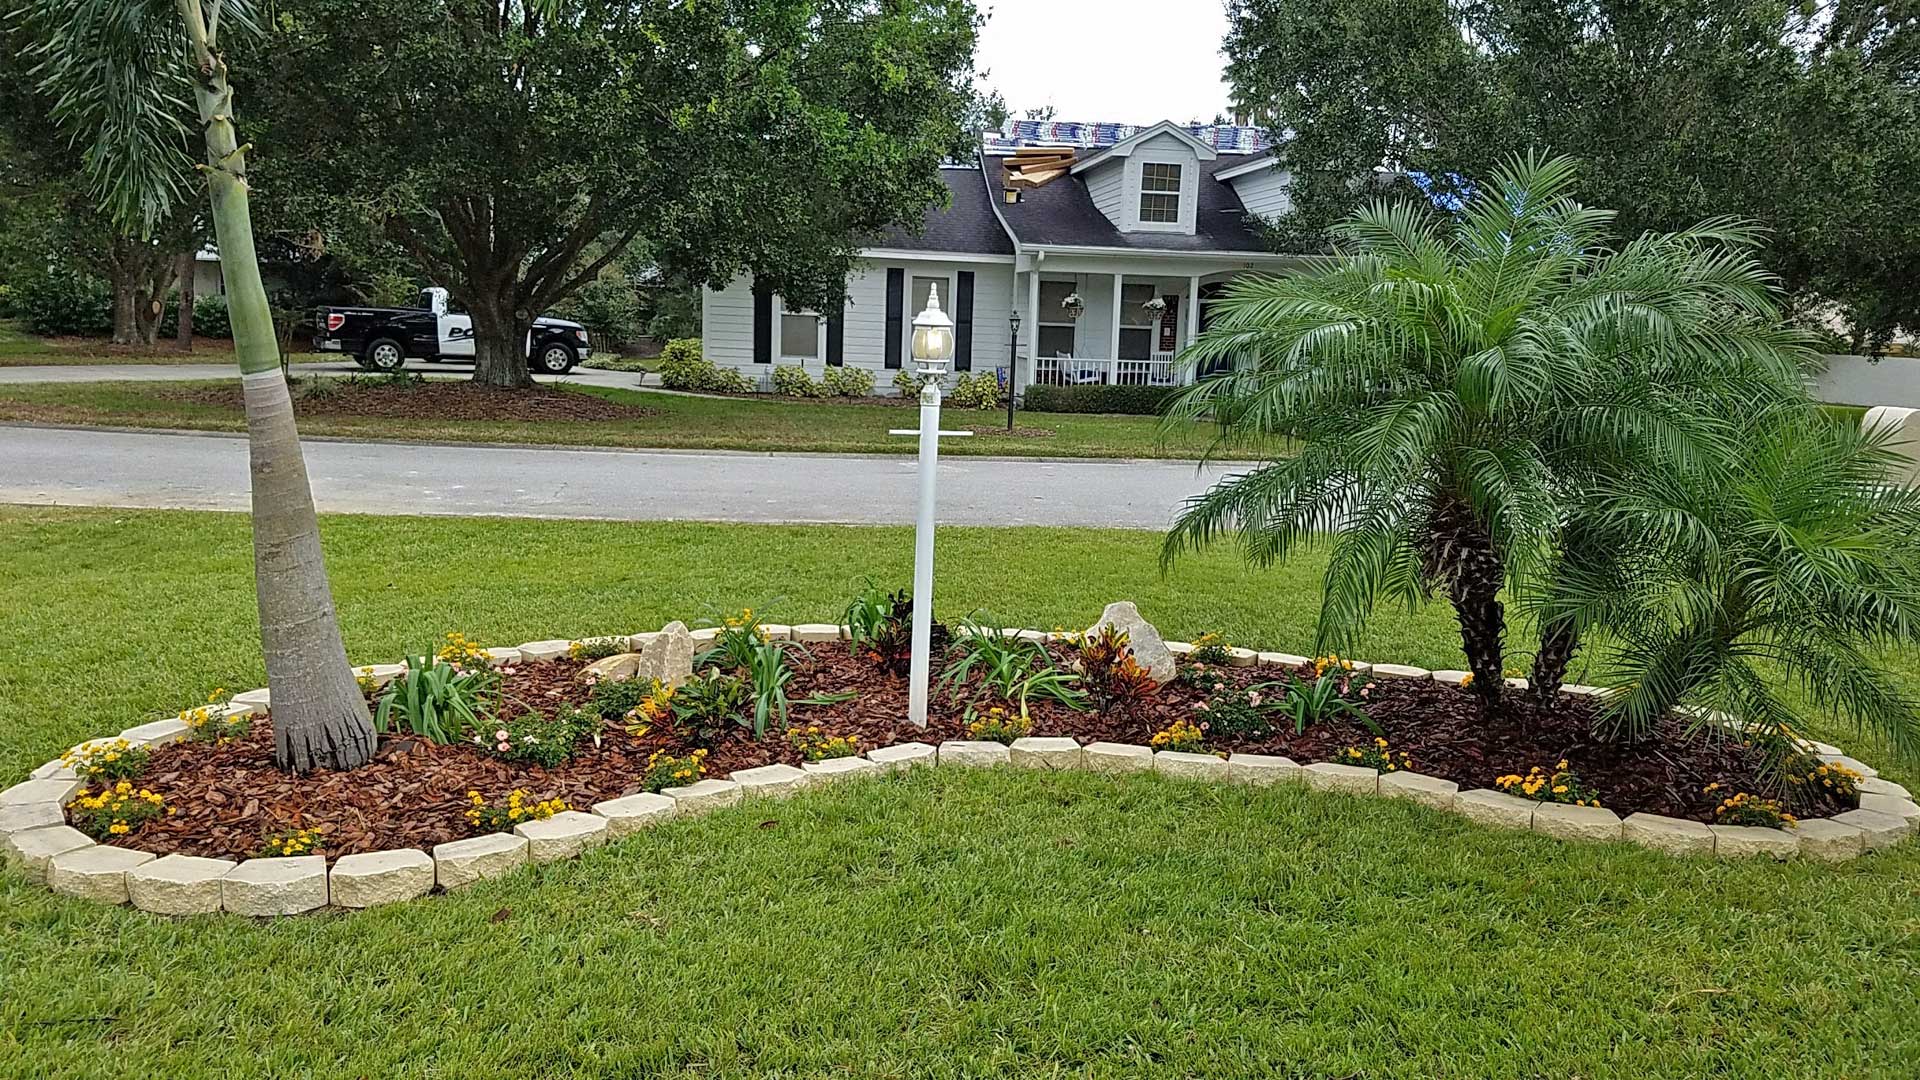 Newly installed landscaping at a home in Lakeland, FL .